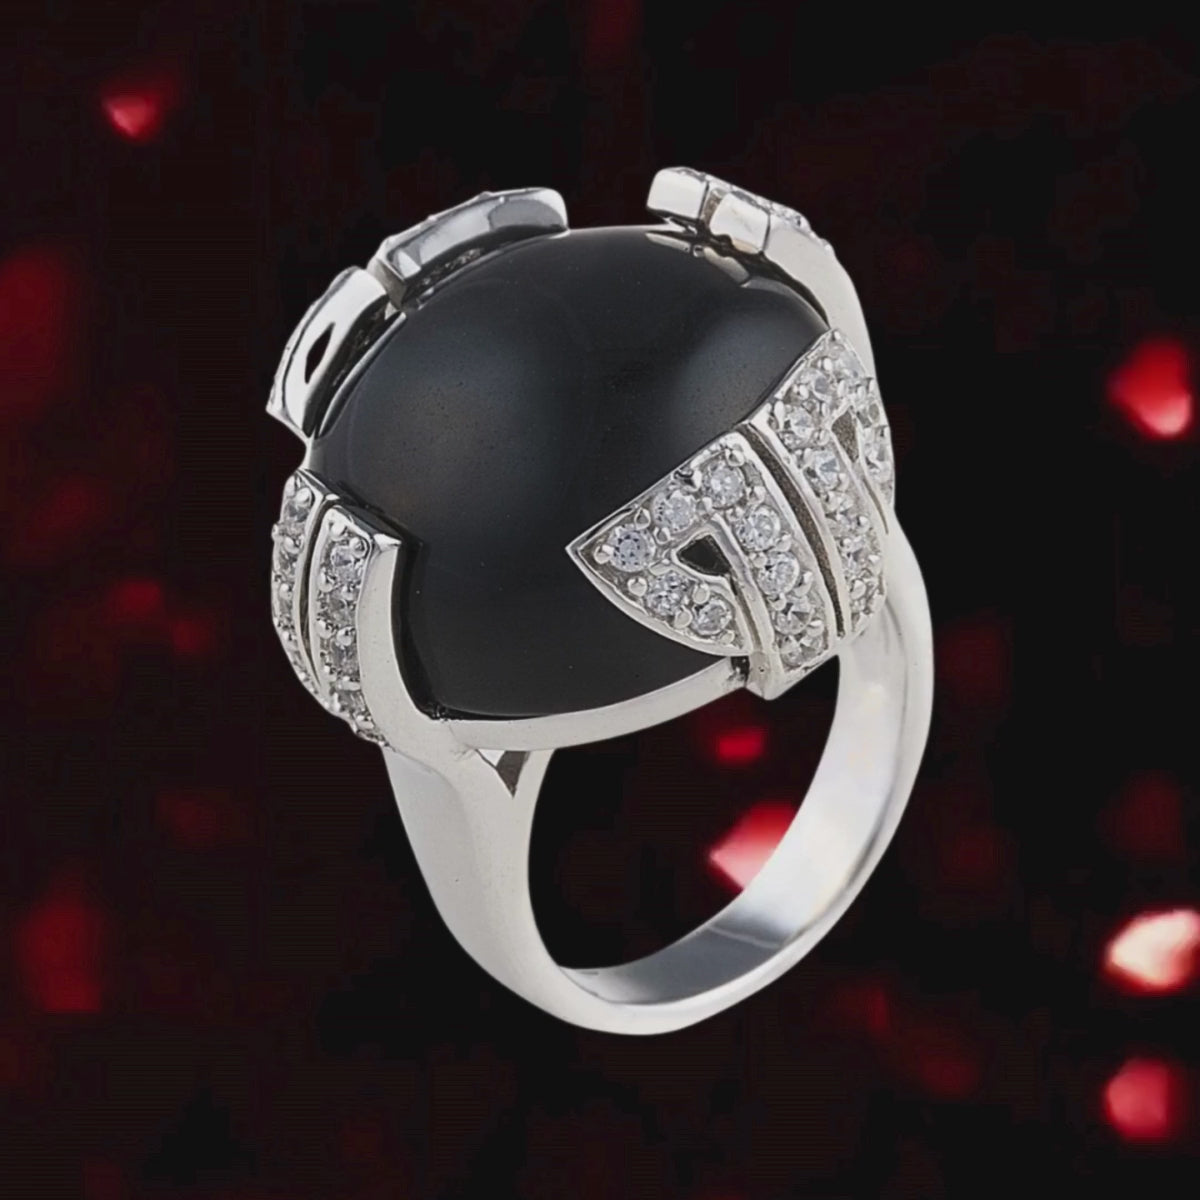 Onyx Secret Ring in 925 sterling silver with a polished black onyx stone held in place with geometric claws encrusted with cubic zirconia stones. Shop rings & affordable luxury jewellery by Bellagio & Co. Worldwide shipping